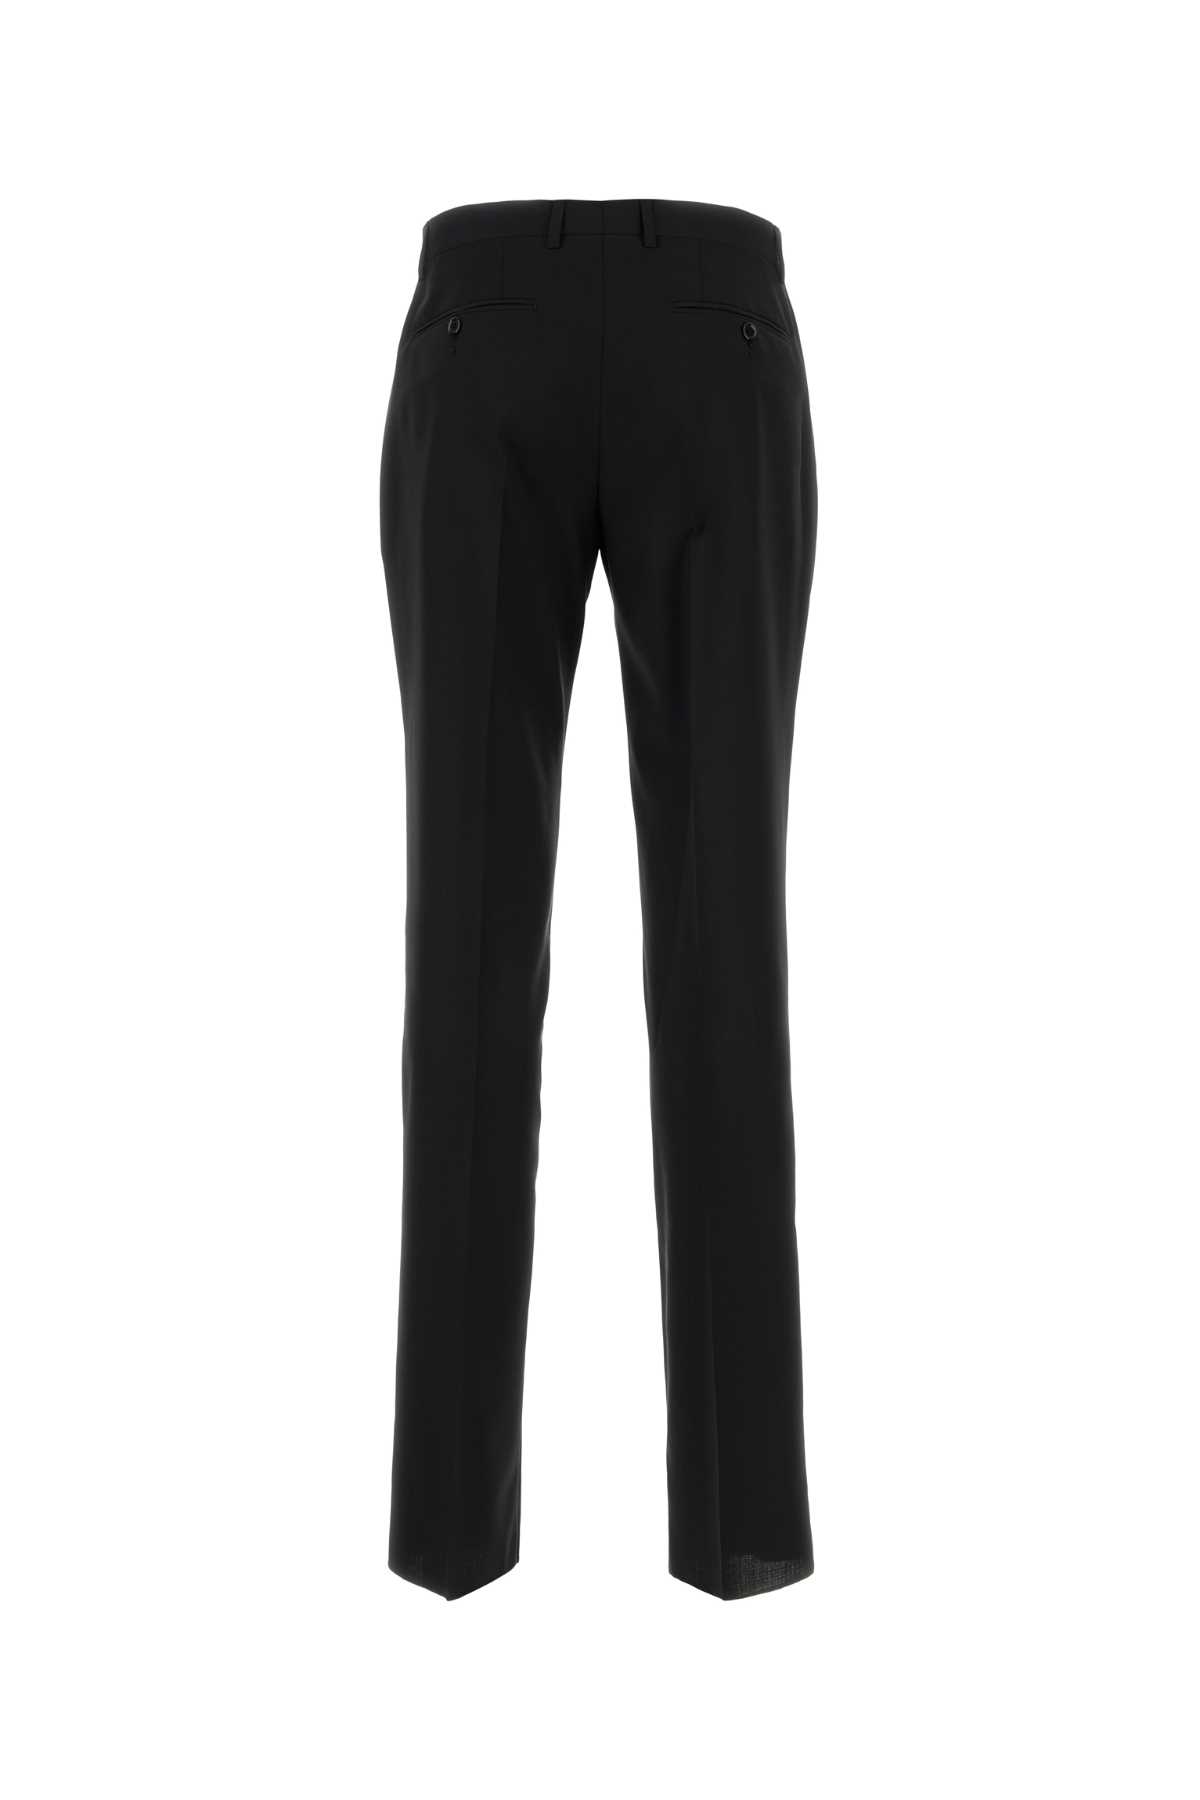 Moschino Black Wool Pant In 0555